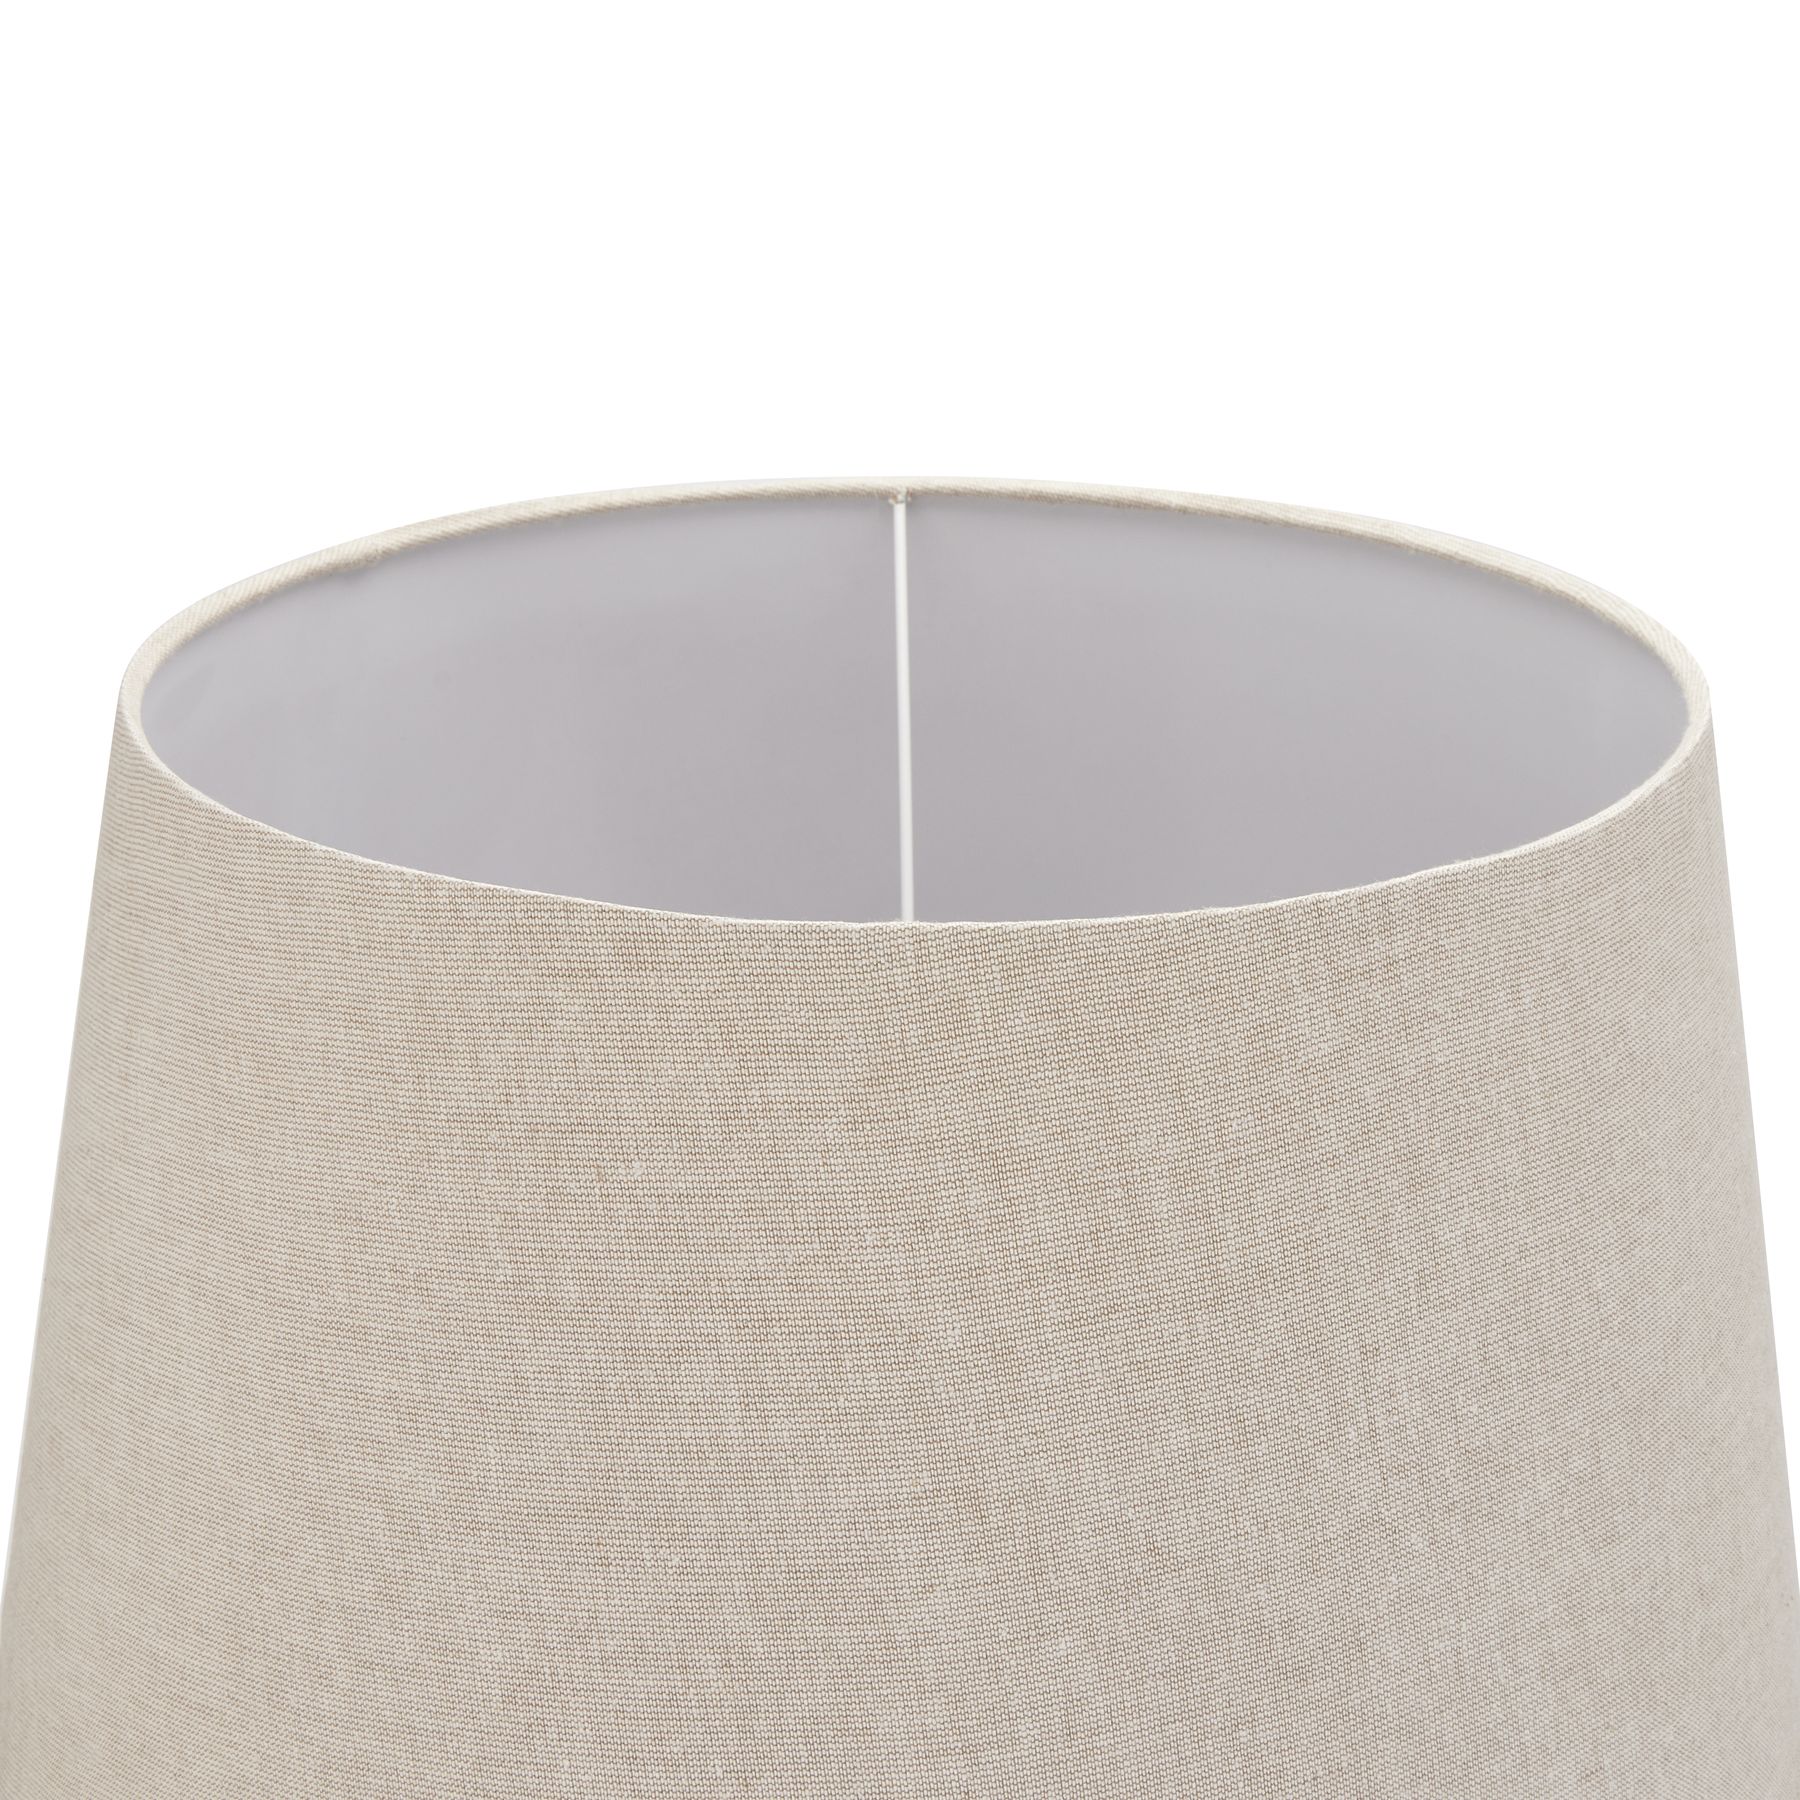 Delaney Grey Pineapple  Lamp With Linen Shade - Image 3